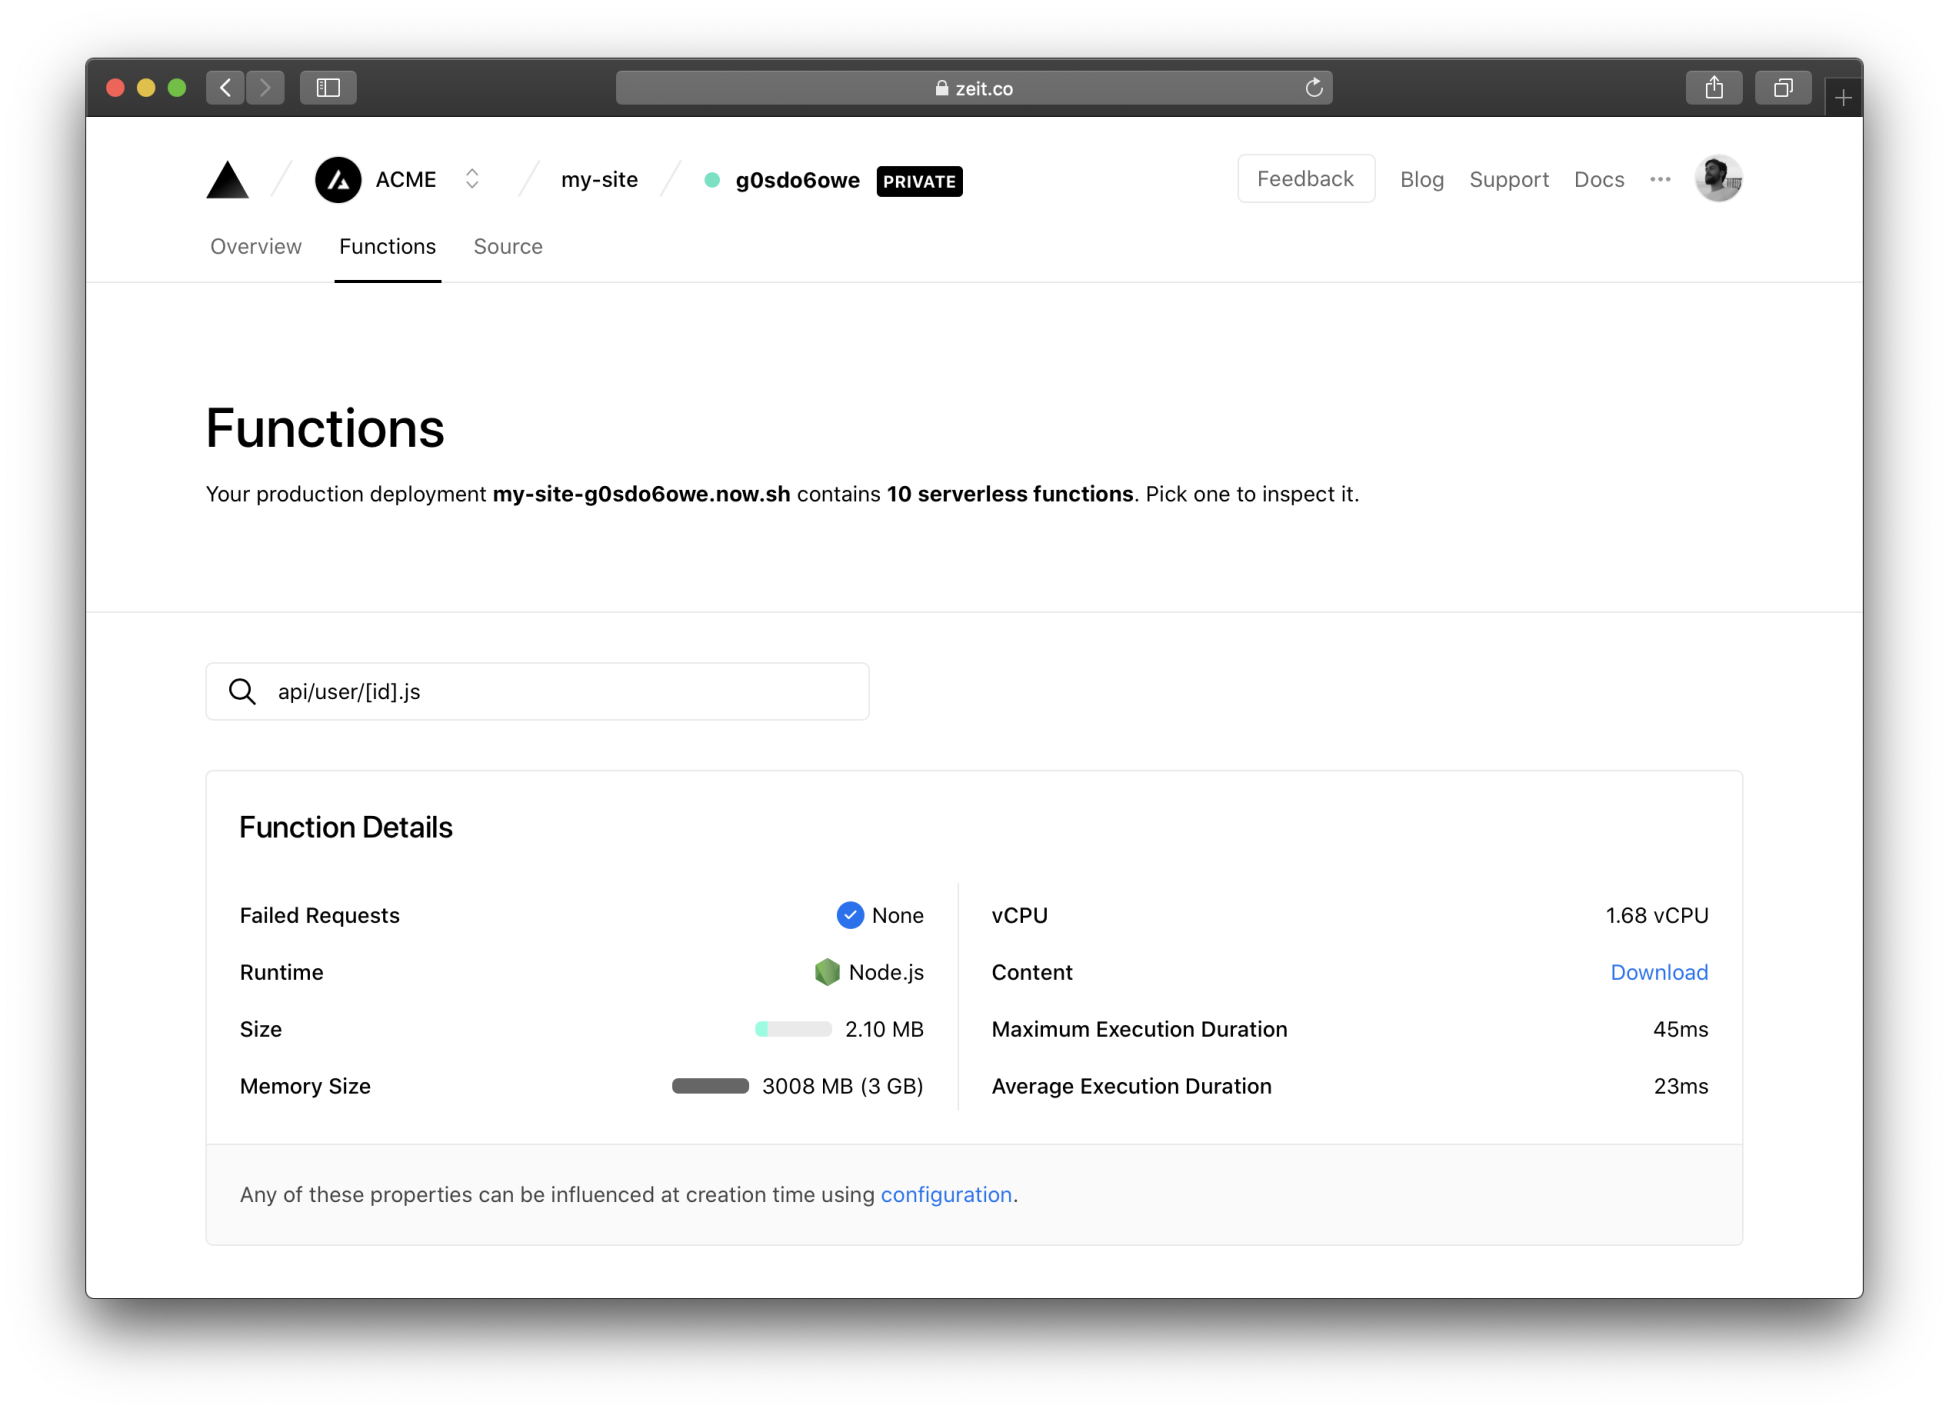 The most important details about your Serverless Functions, all at one glance.